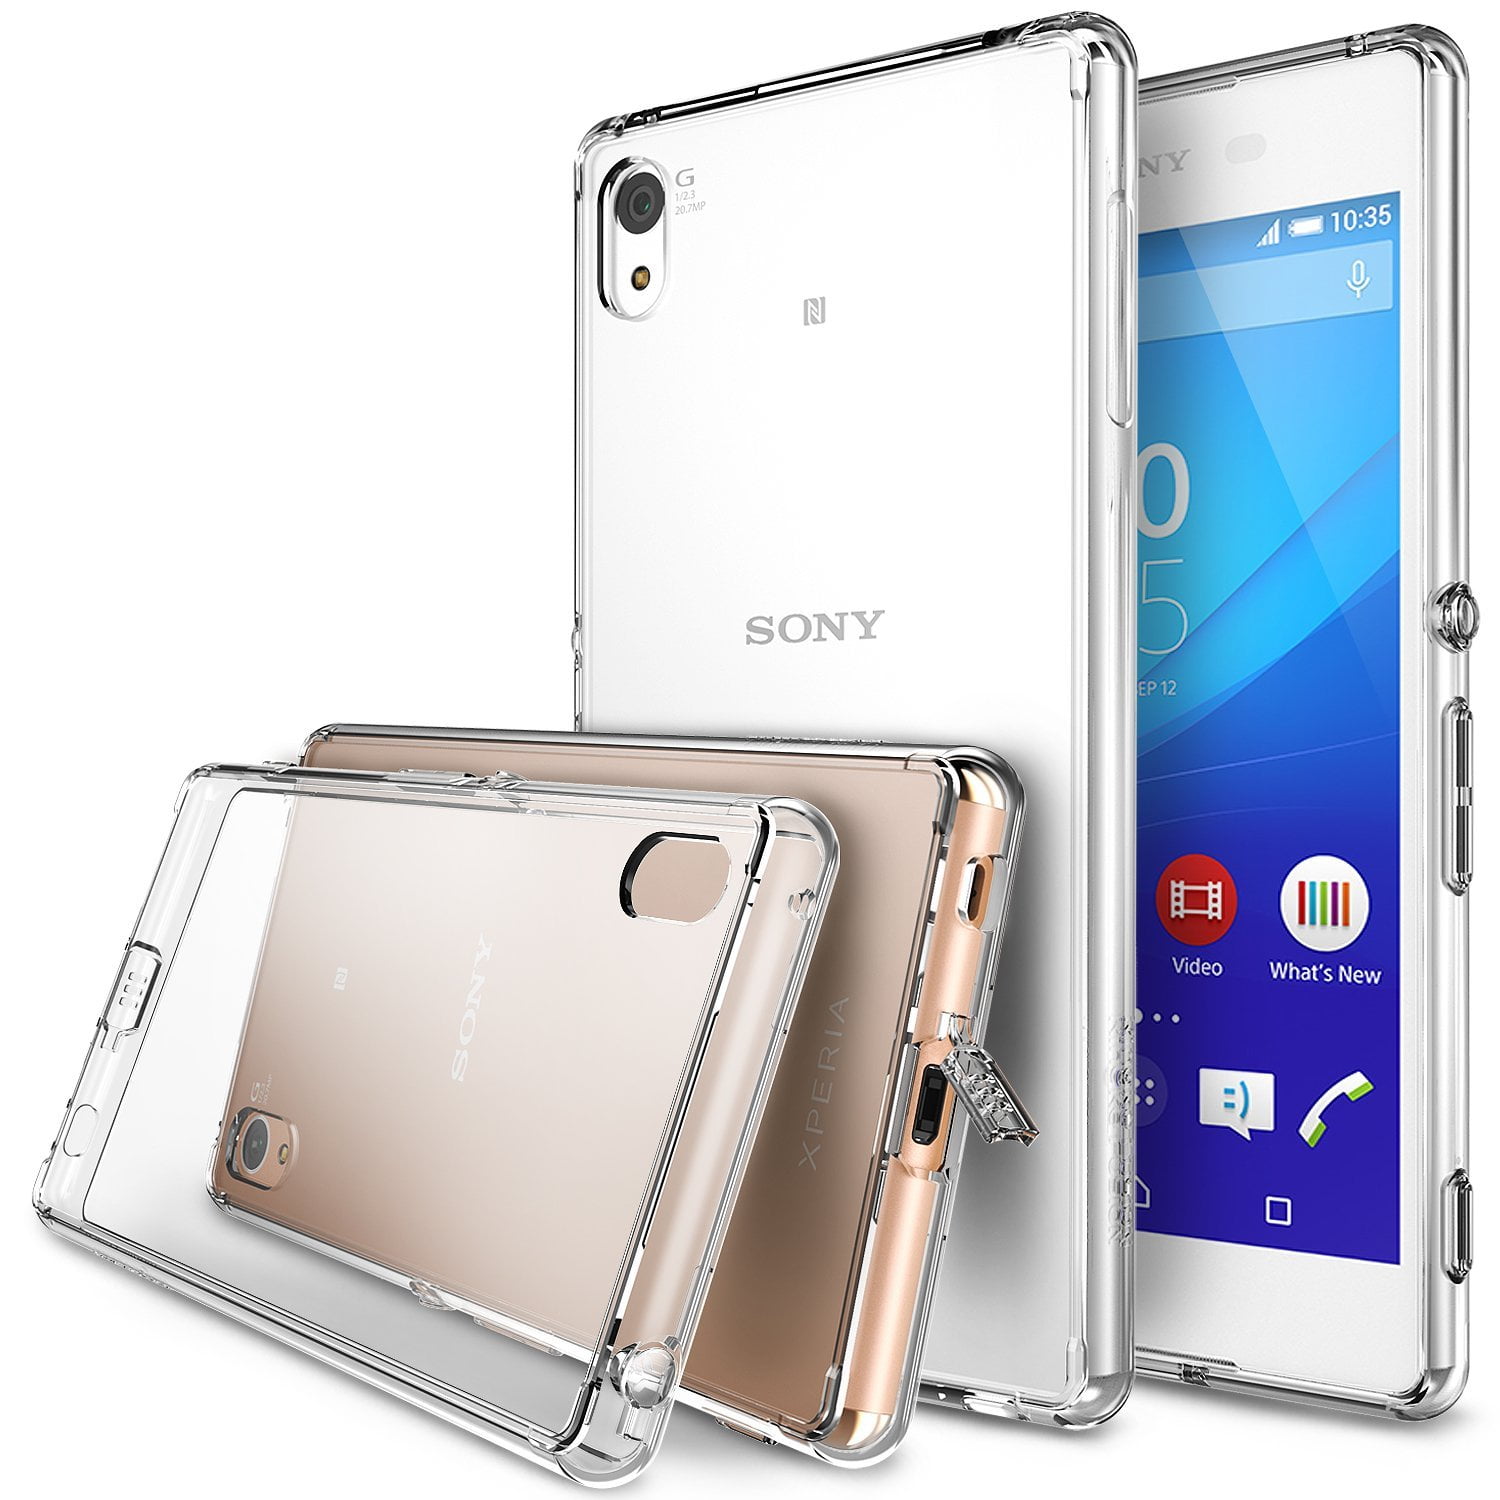 Ringke Case Compatible Sony Xperia Z3 Plus, PC Back TPU Bumper Drop Protection Phone Cover - Clear - Walmart.com